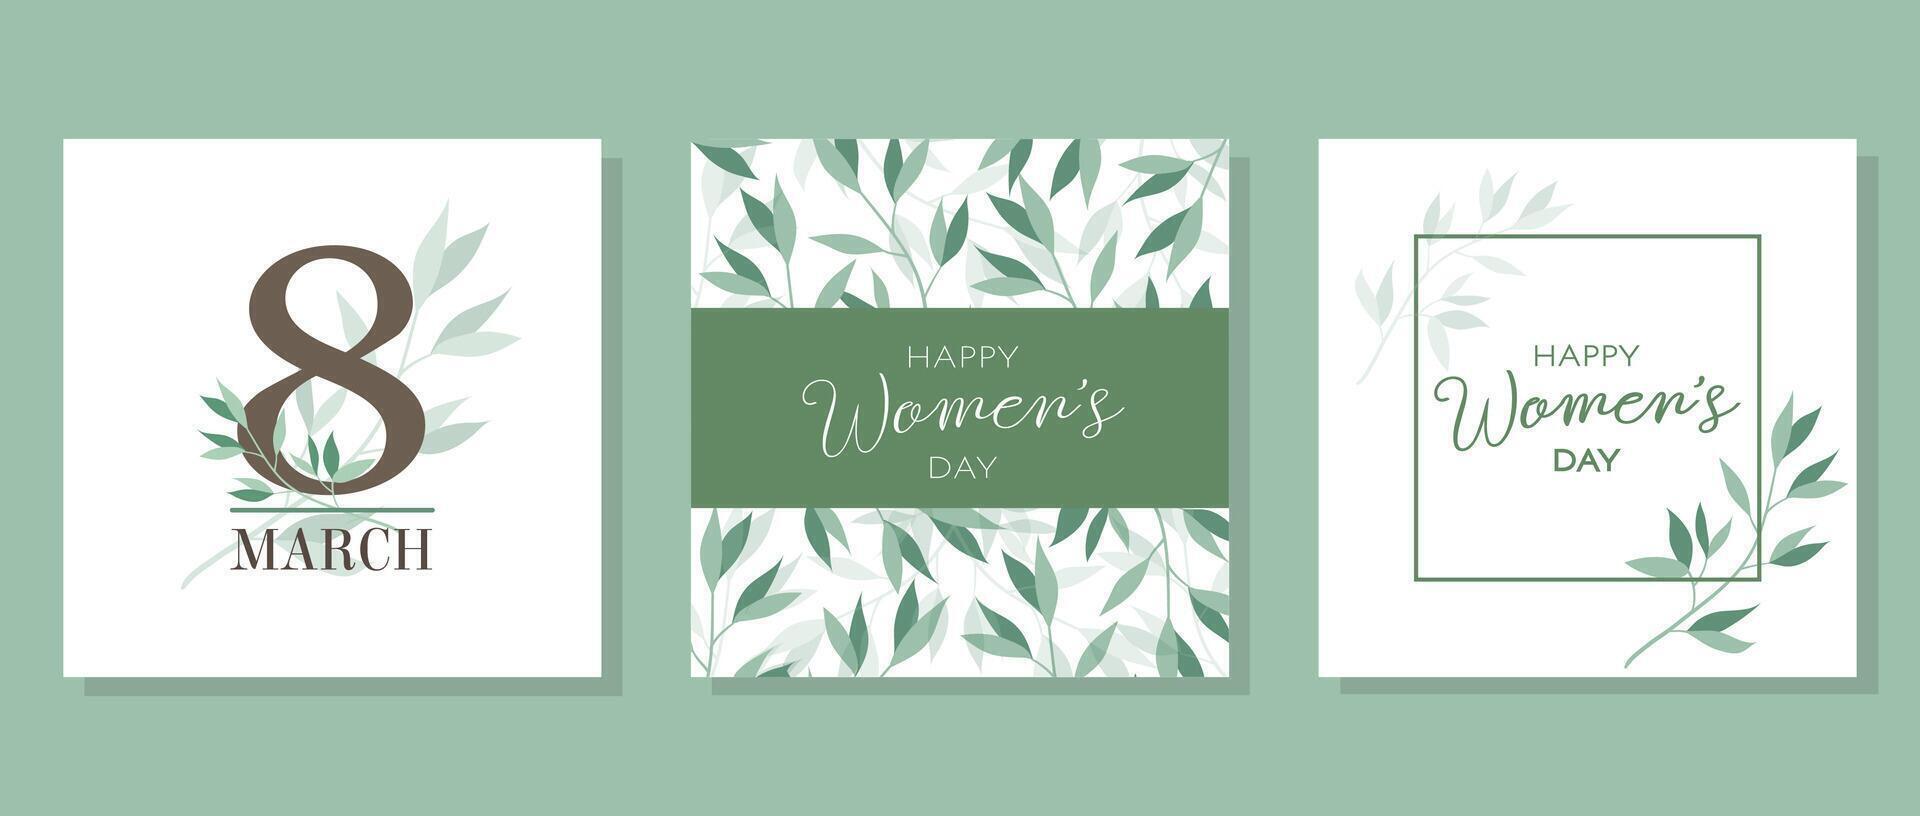 Set of square posters for International Women's Day, March 8. Minimalist design with leaf pattern vector